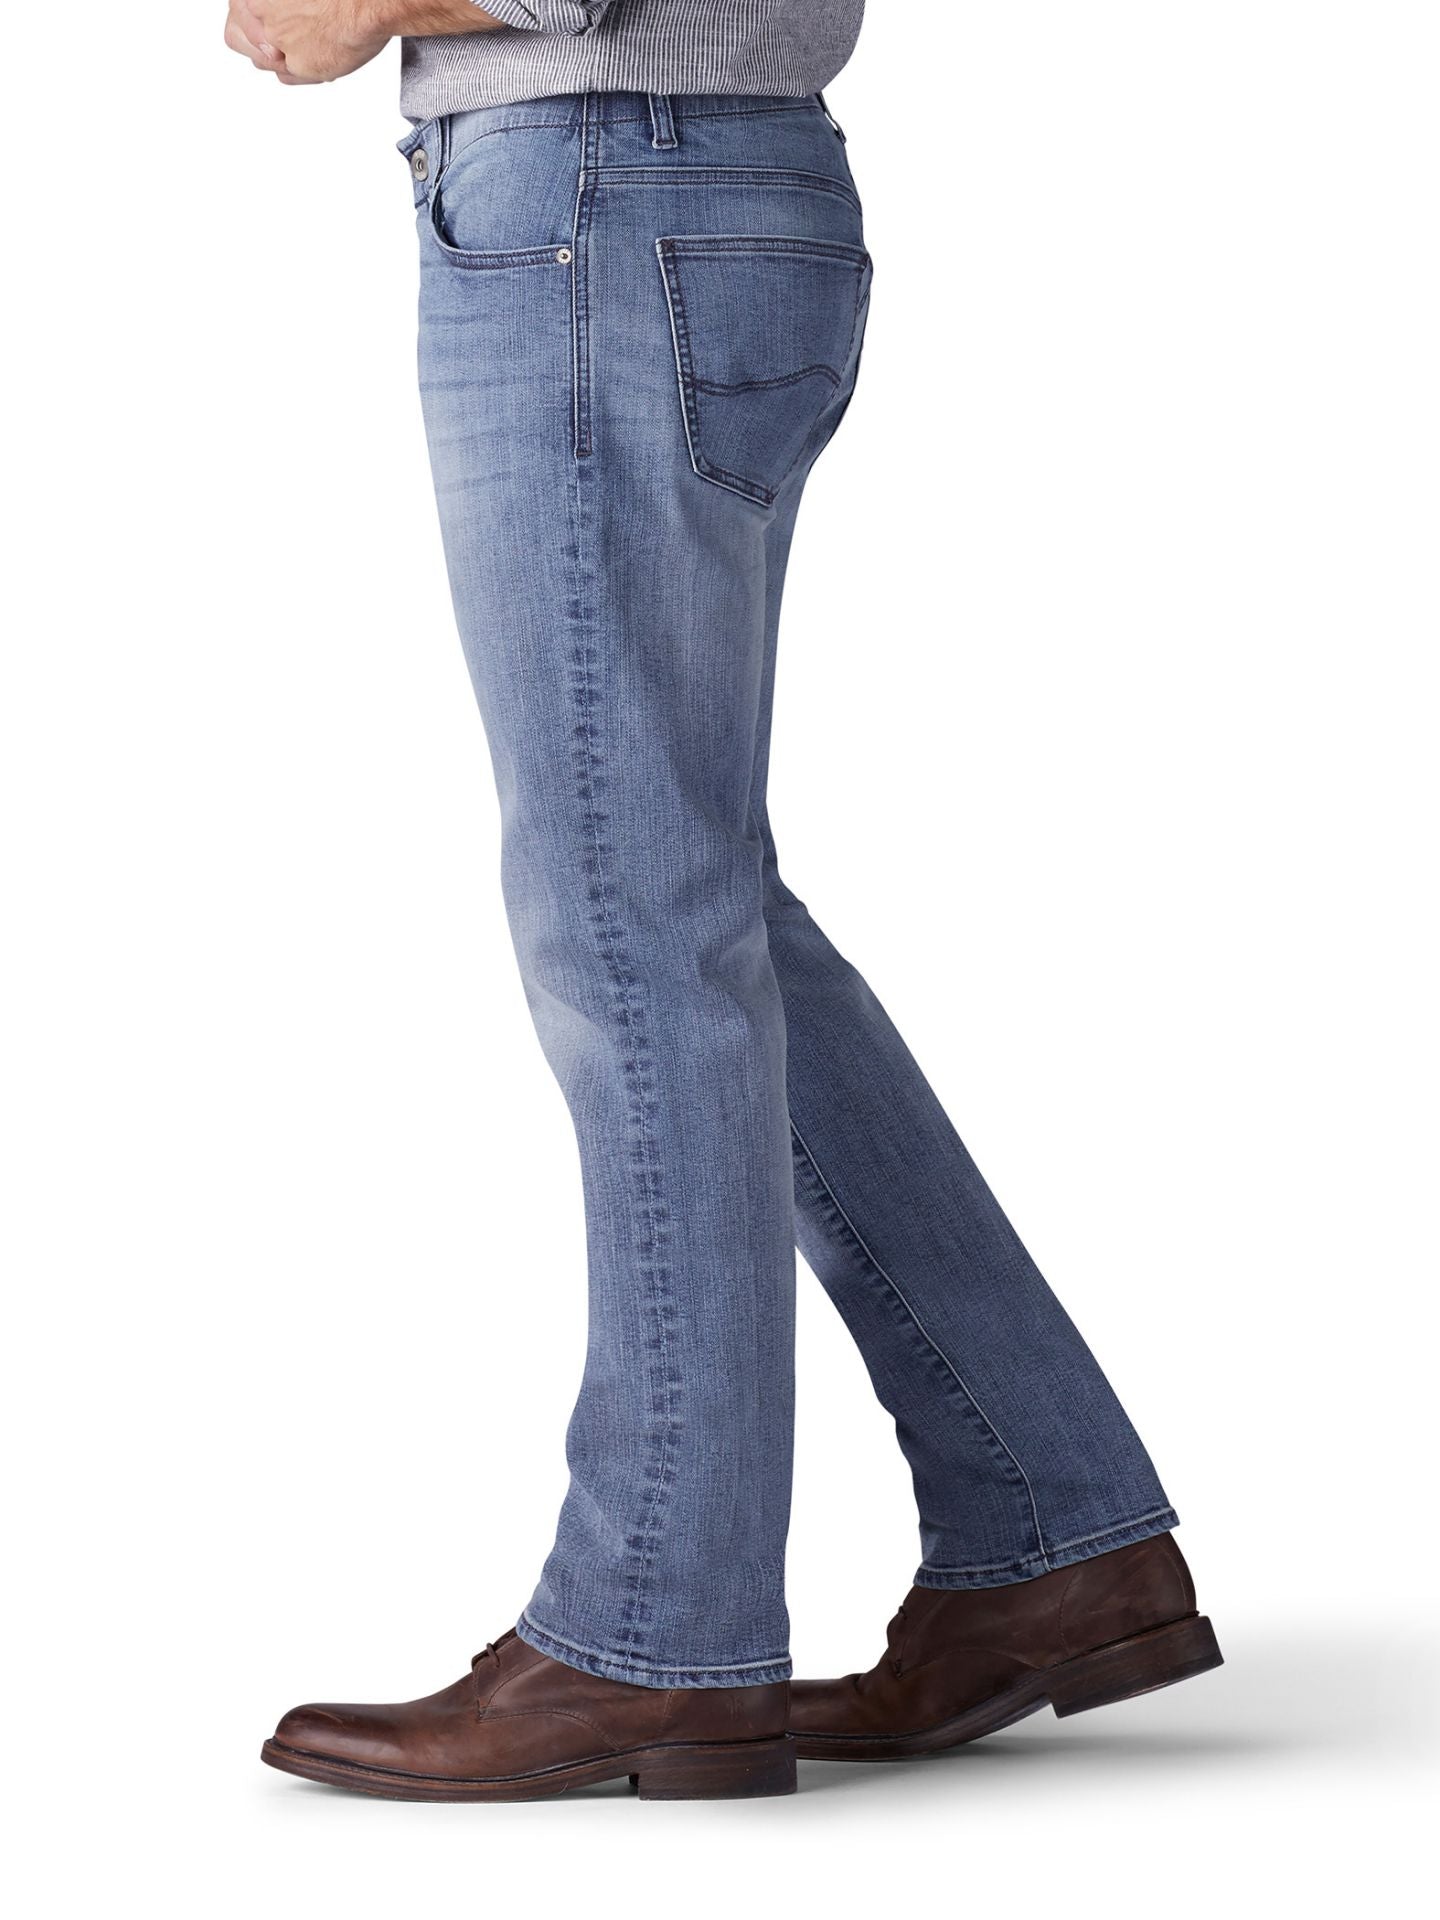 Men's Extreme Motion Straight Fit Tapered Leg Jean